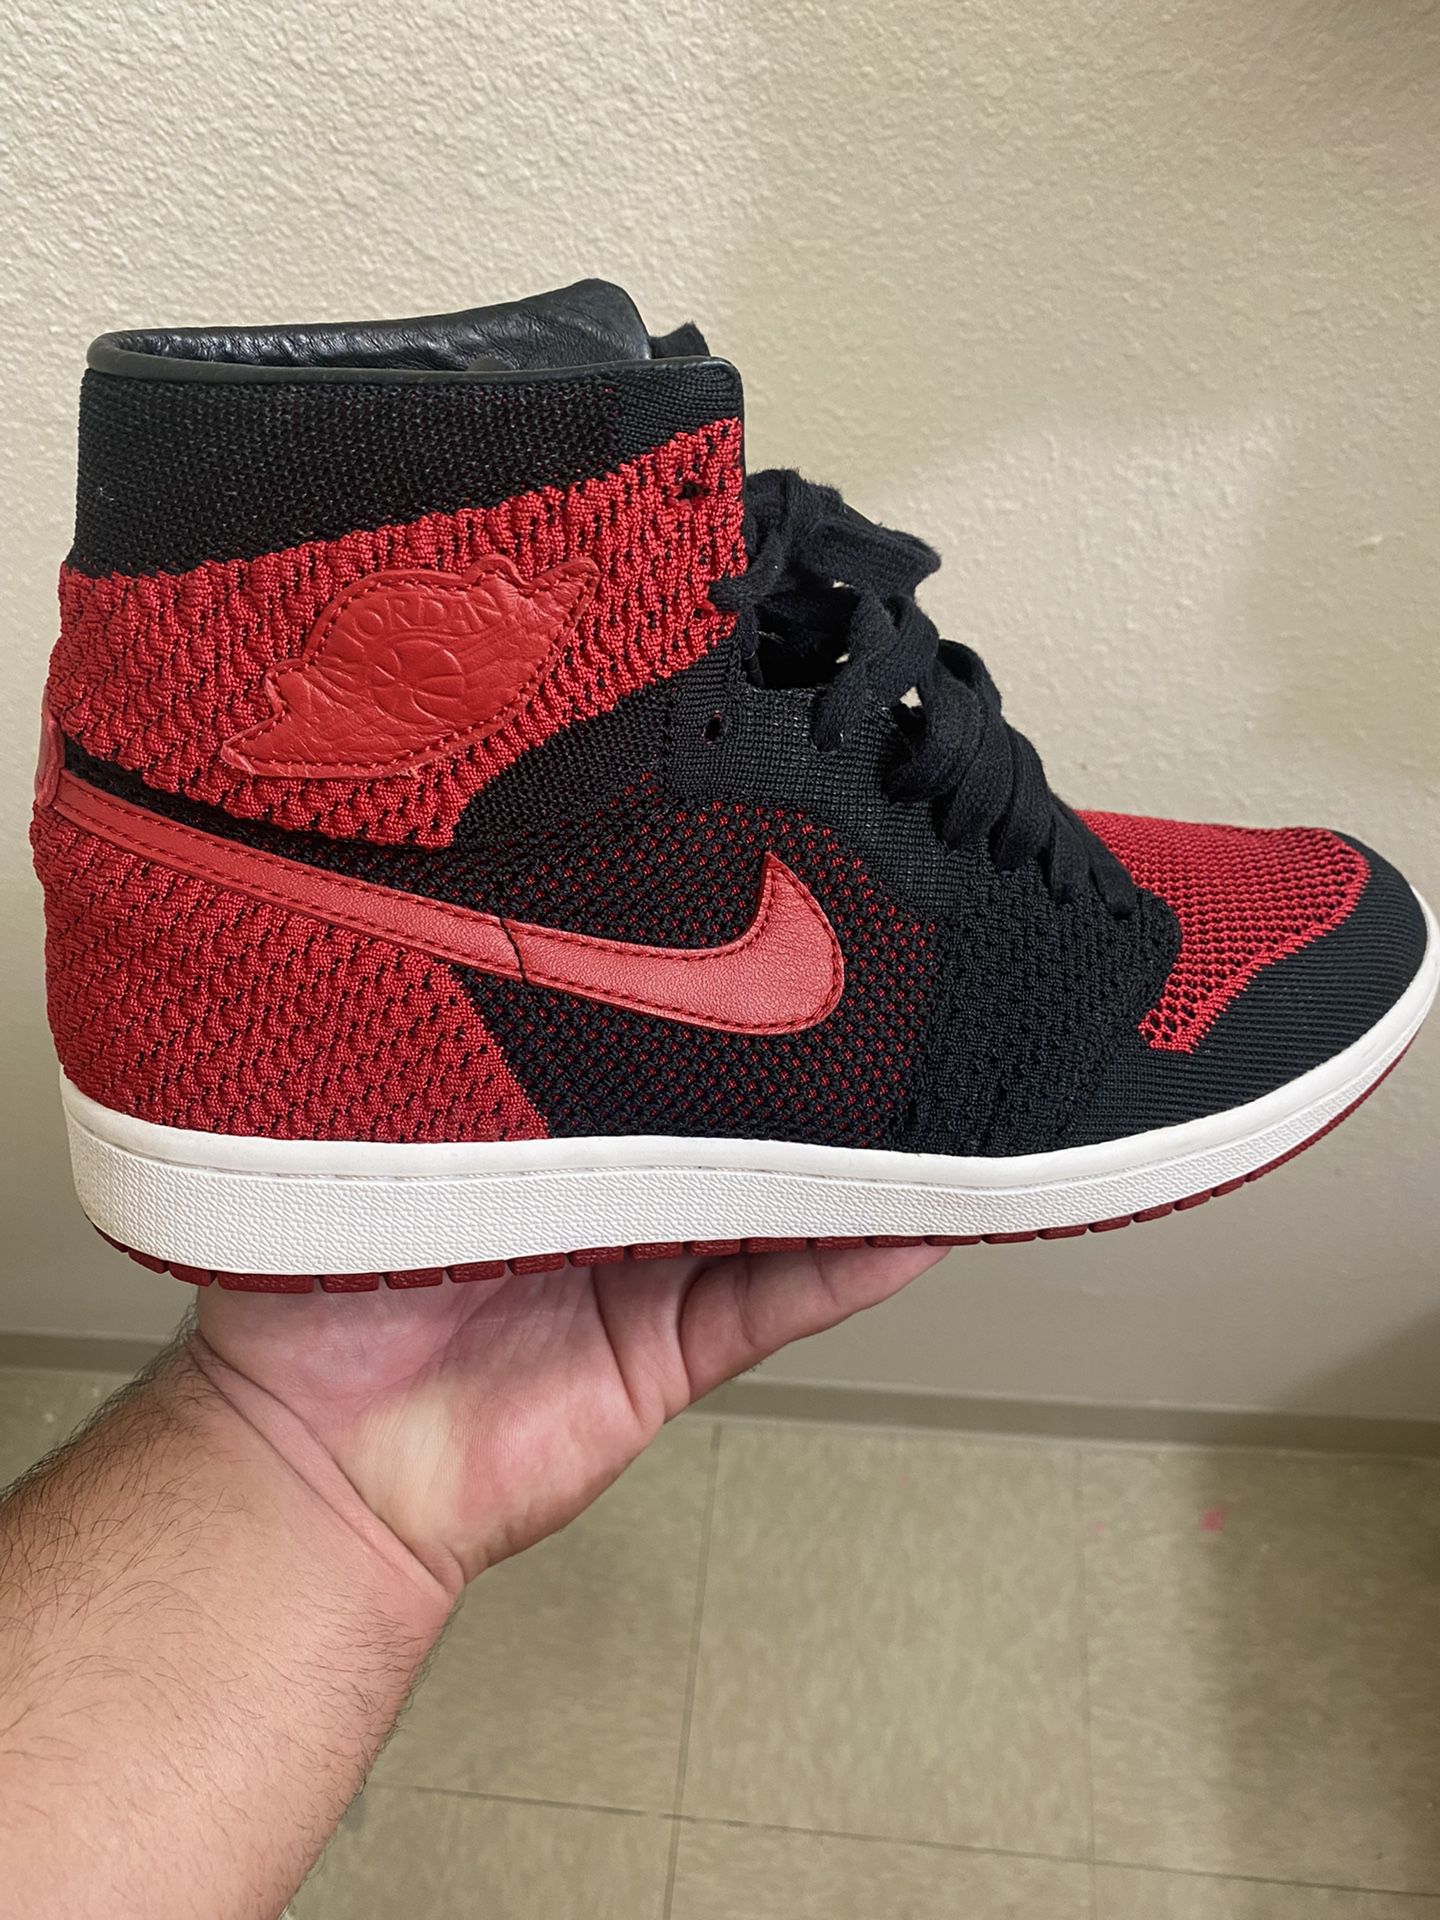 Air Jordan 1 Banned Flyknit Size 11 Used 